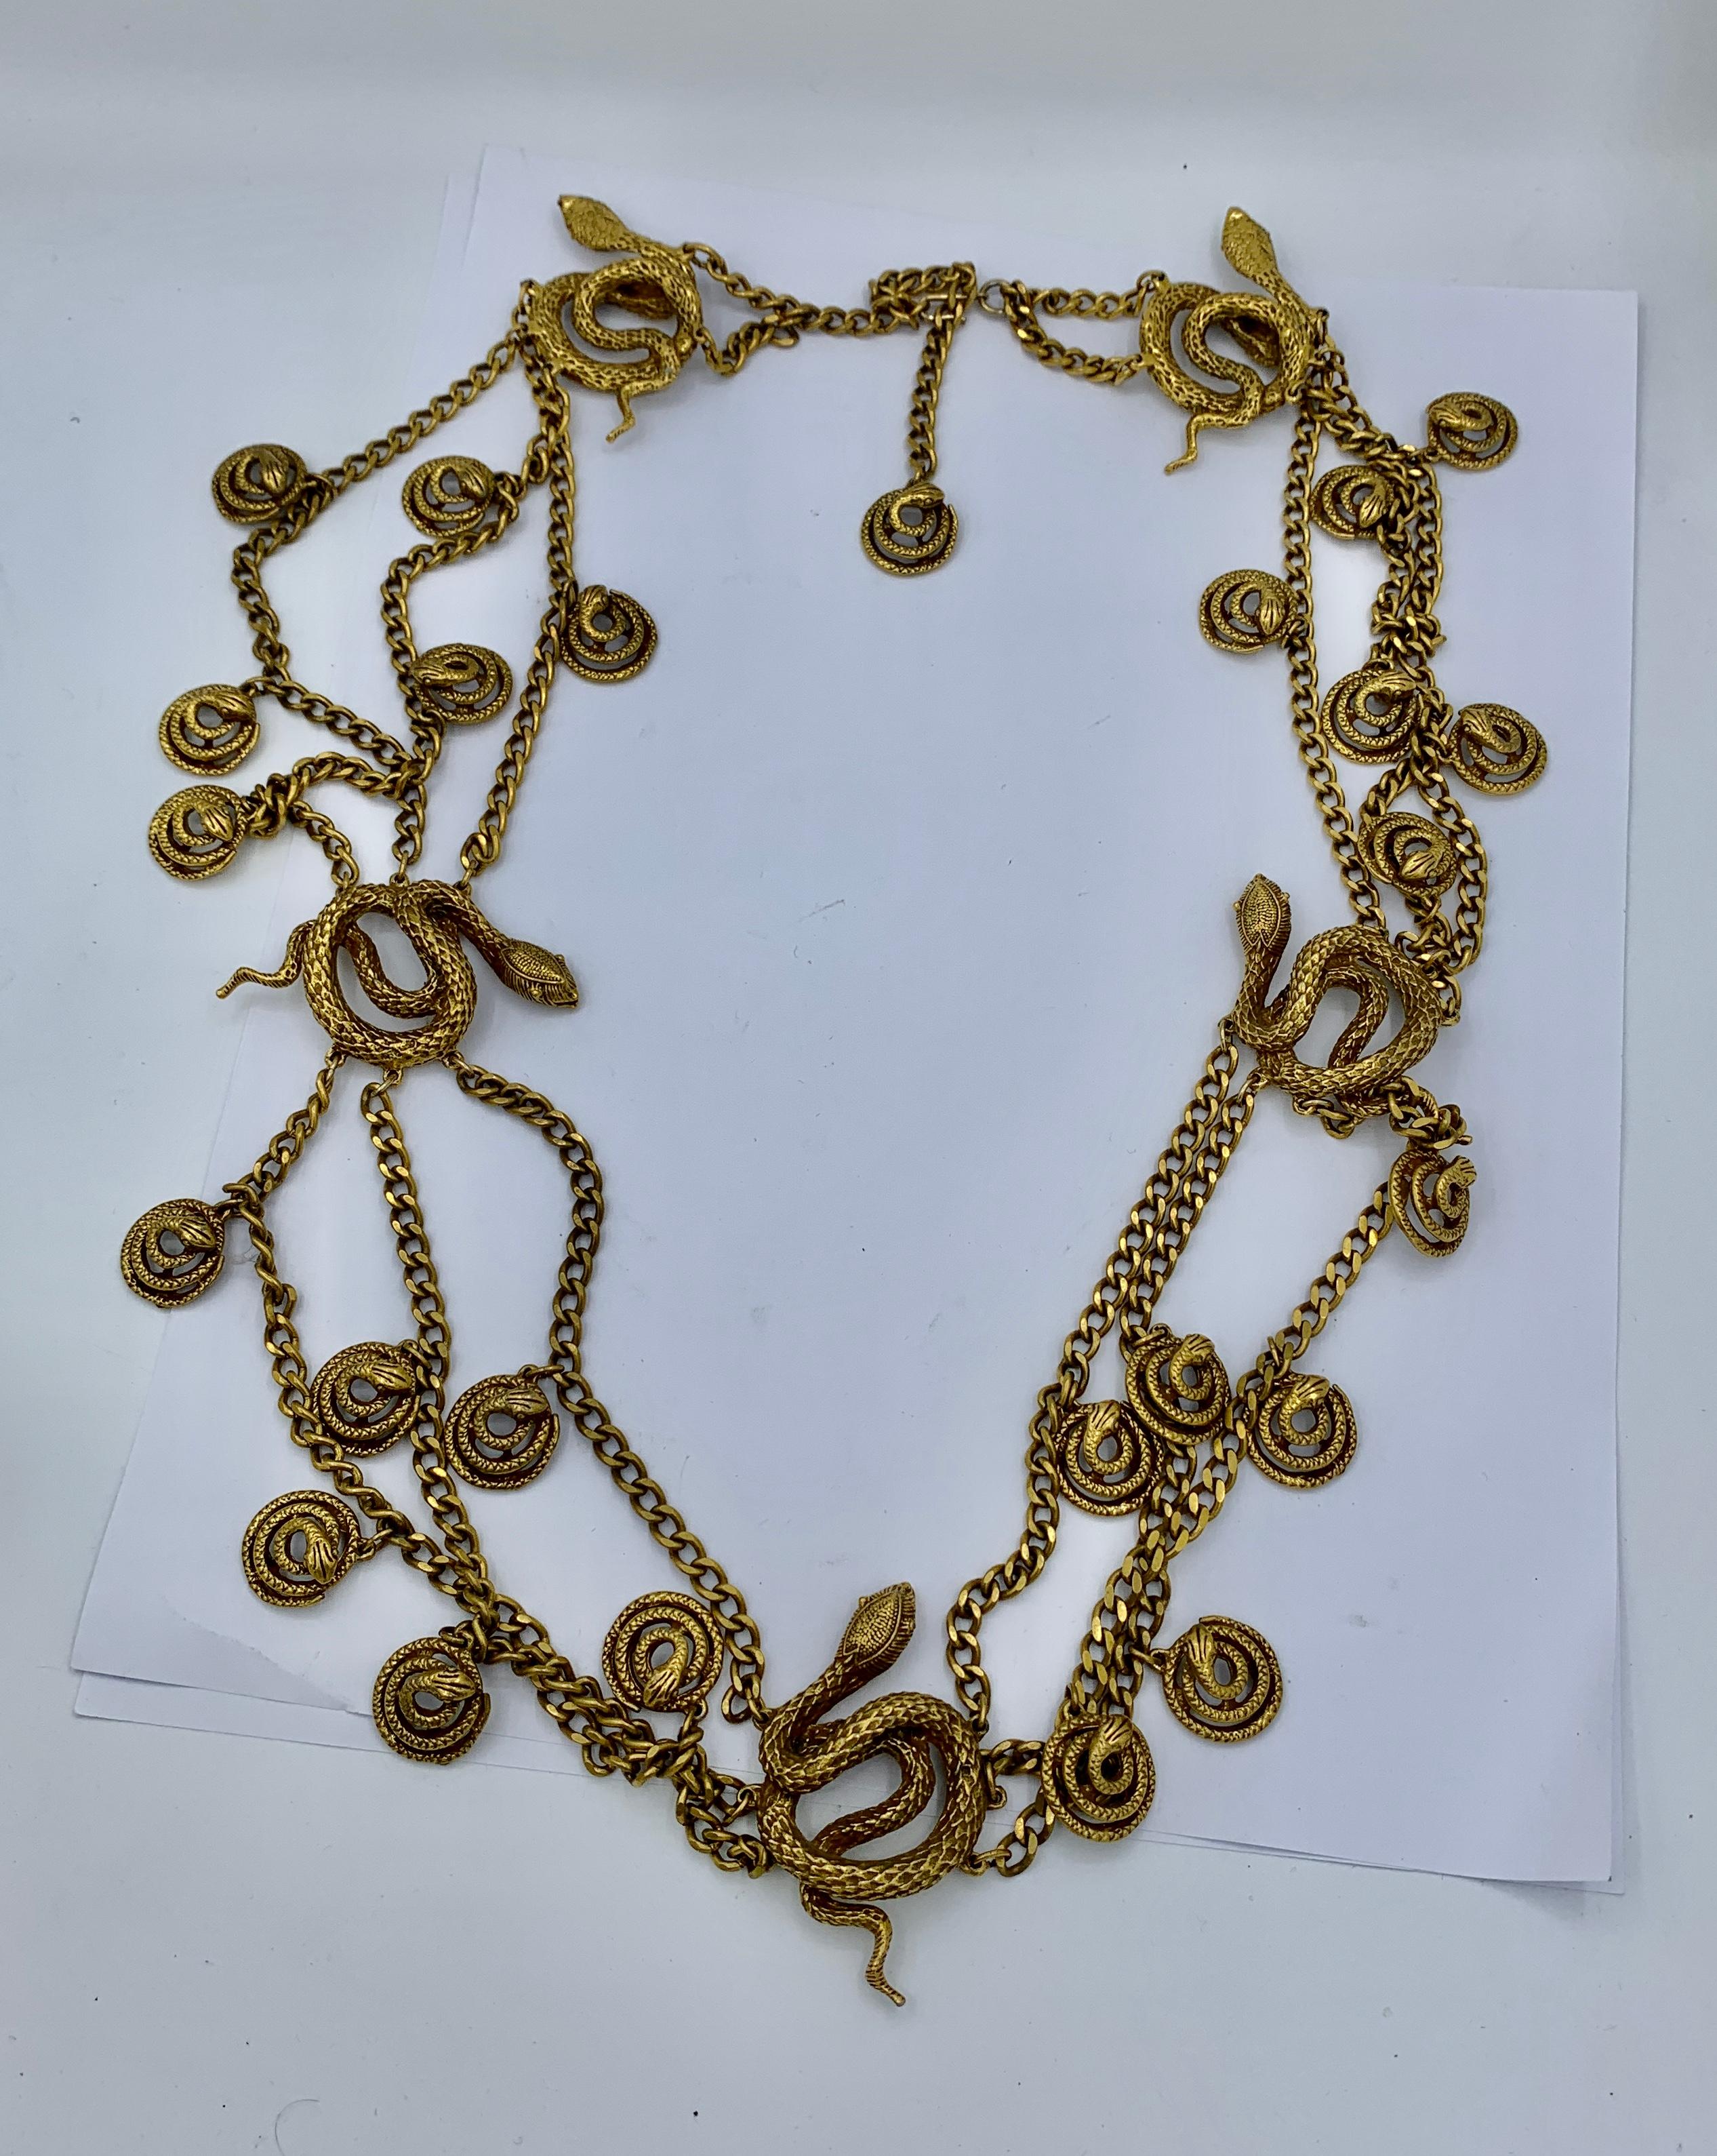 This is a fabulous and dramatic Snake Necklace or Belt in Goldtone metal.  The extraordinary necklace dates to the Mid-Century period and is a multi-strand necklace or belt of 32 inches in length.  The necklace or belt length is adjustable as the